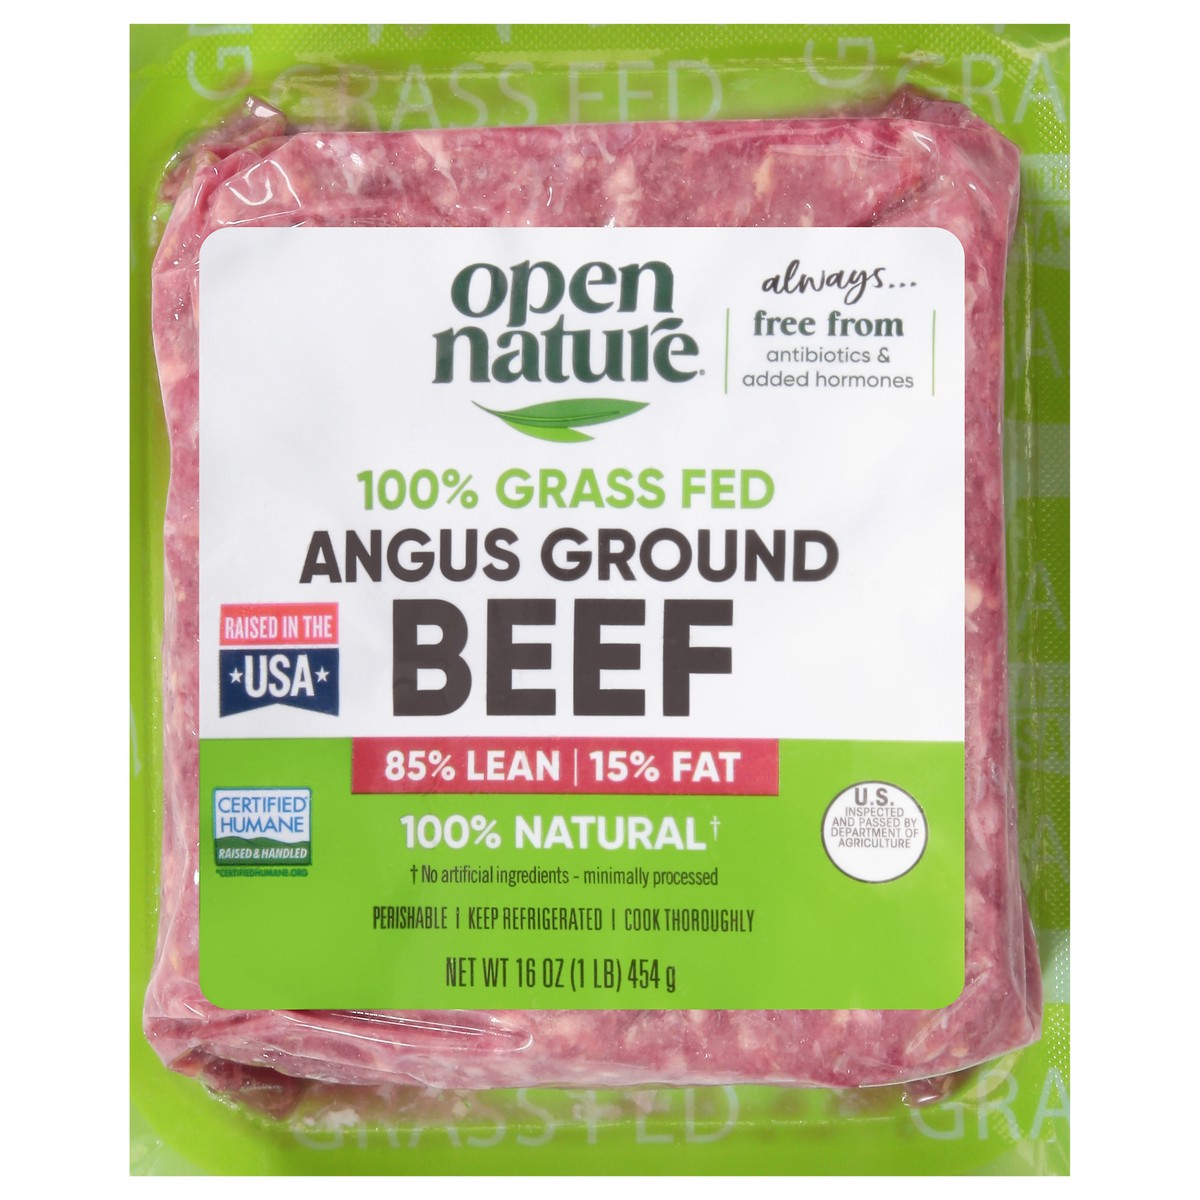 slide 11 of 11, Open Nature Beef, Ground, 85% Lean, Angus, Grass Fed, 